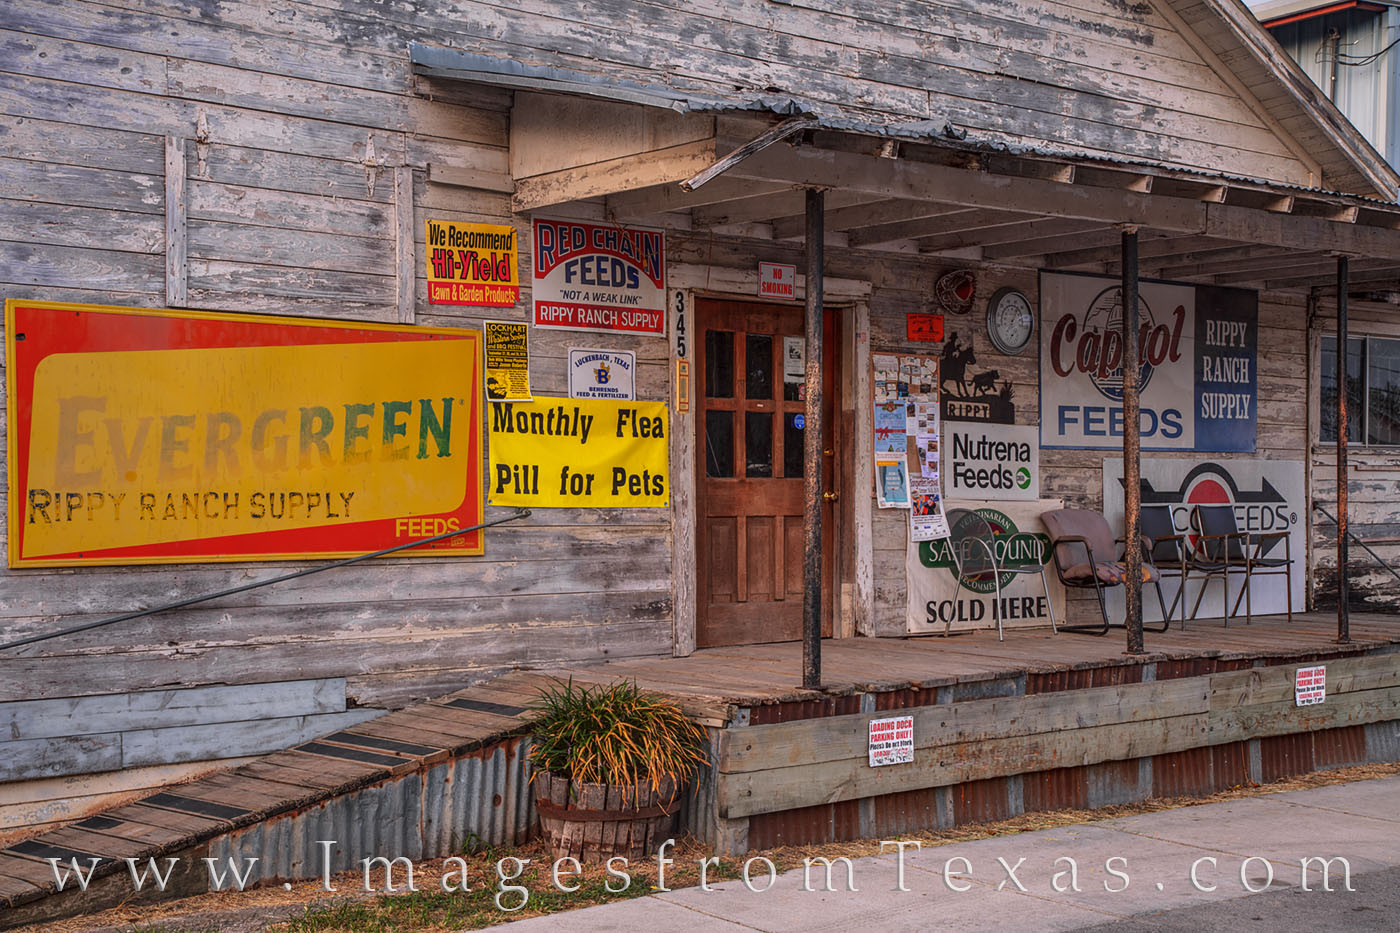 Along Mercer Street in Dripping Springs, the Dripping Springs Feed Store is ready for business.